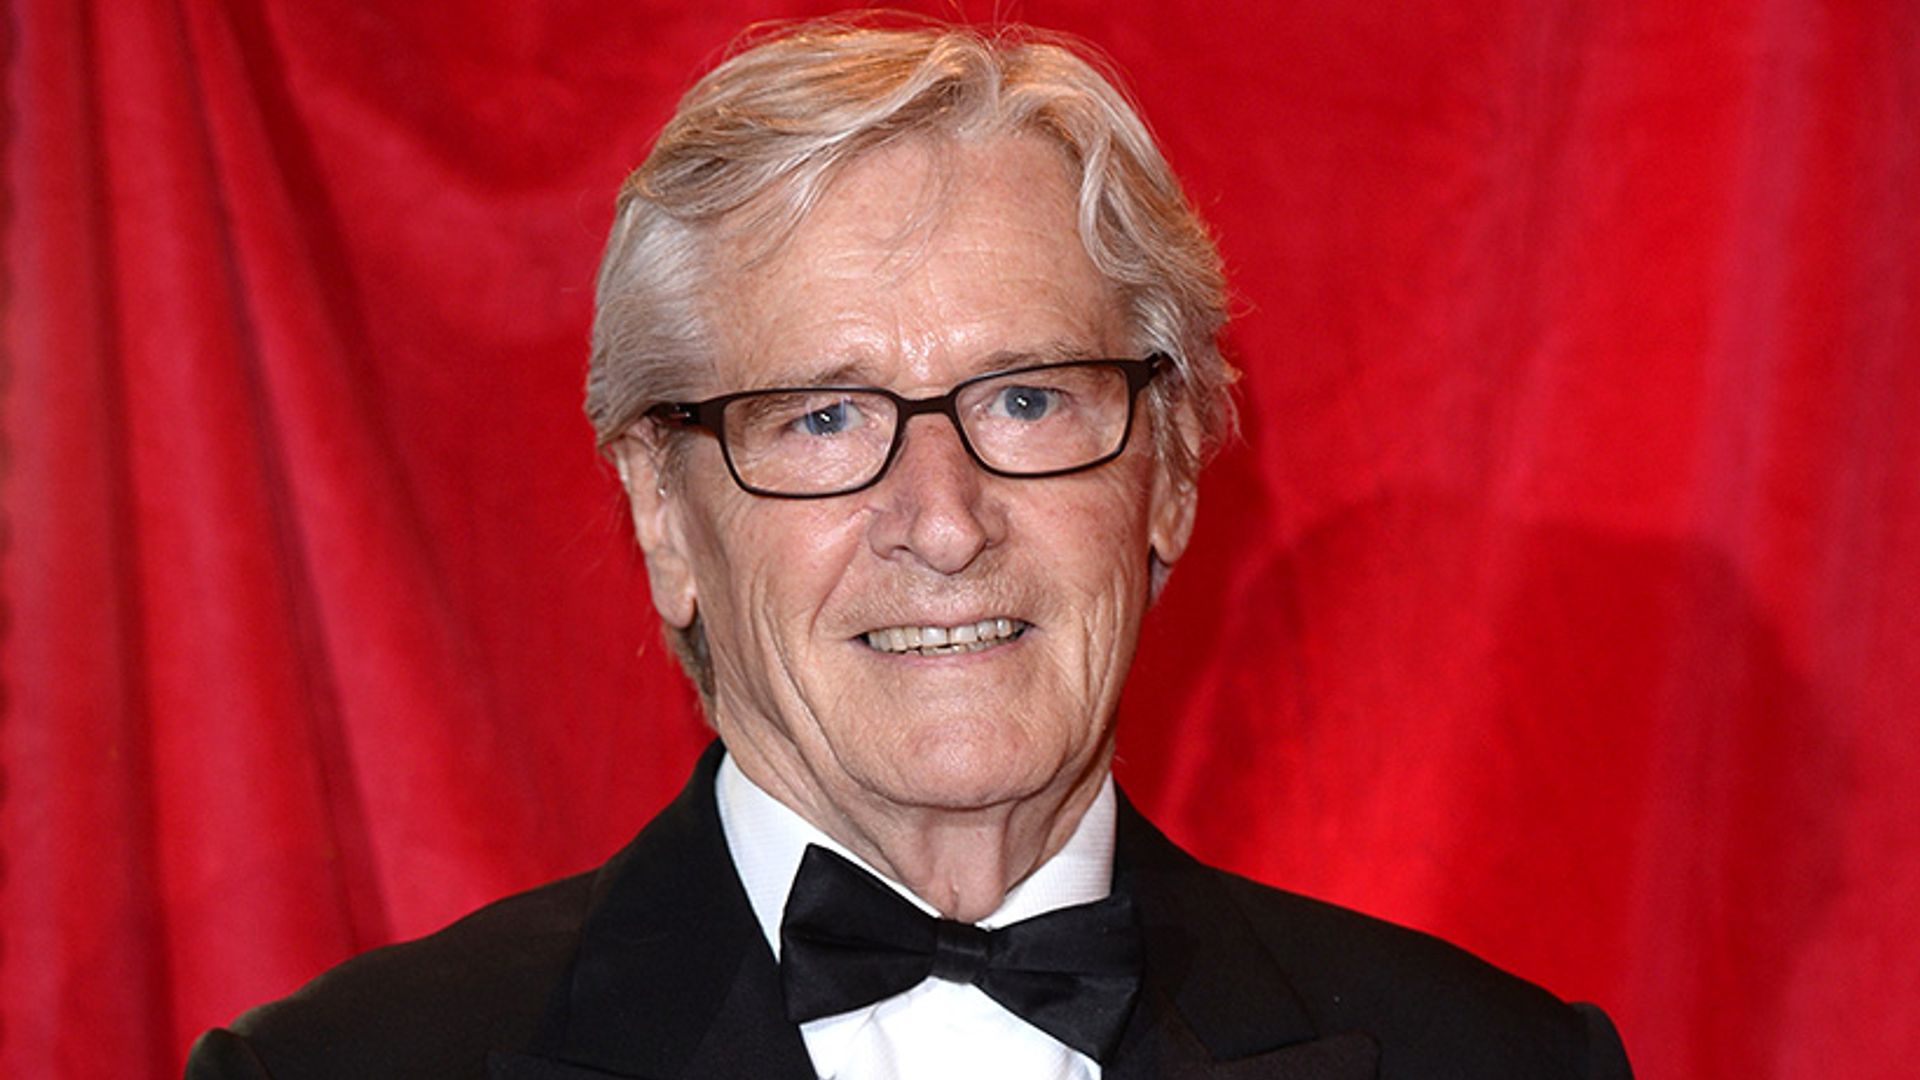 Coronation Street's Bill Roache opens up about his daughter's death - and how he got over the grief